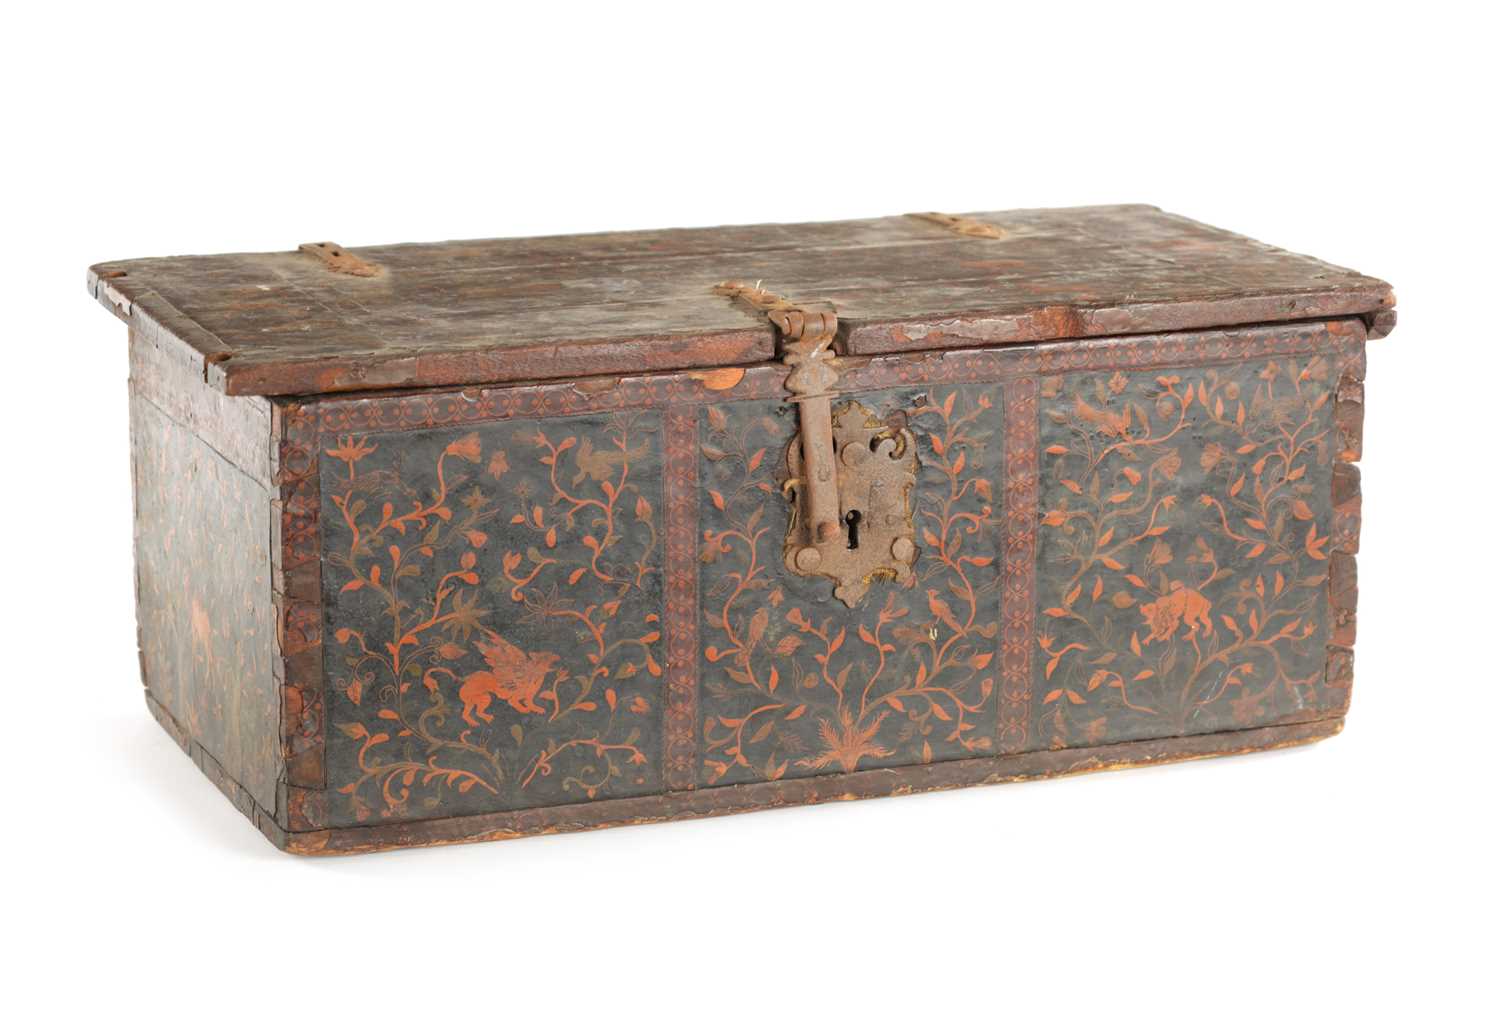 Lot 560 - A RARE 17TH CENTURY INDIAN LACQUERWORK WOODEN BOX